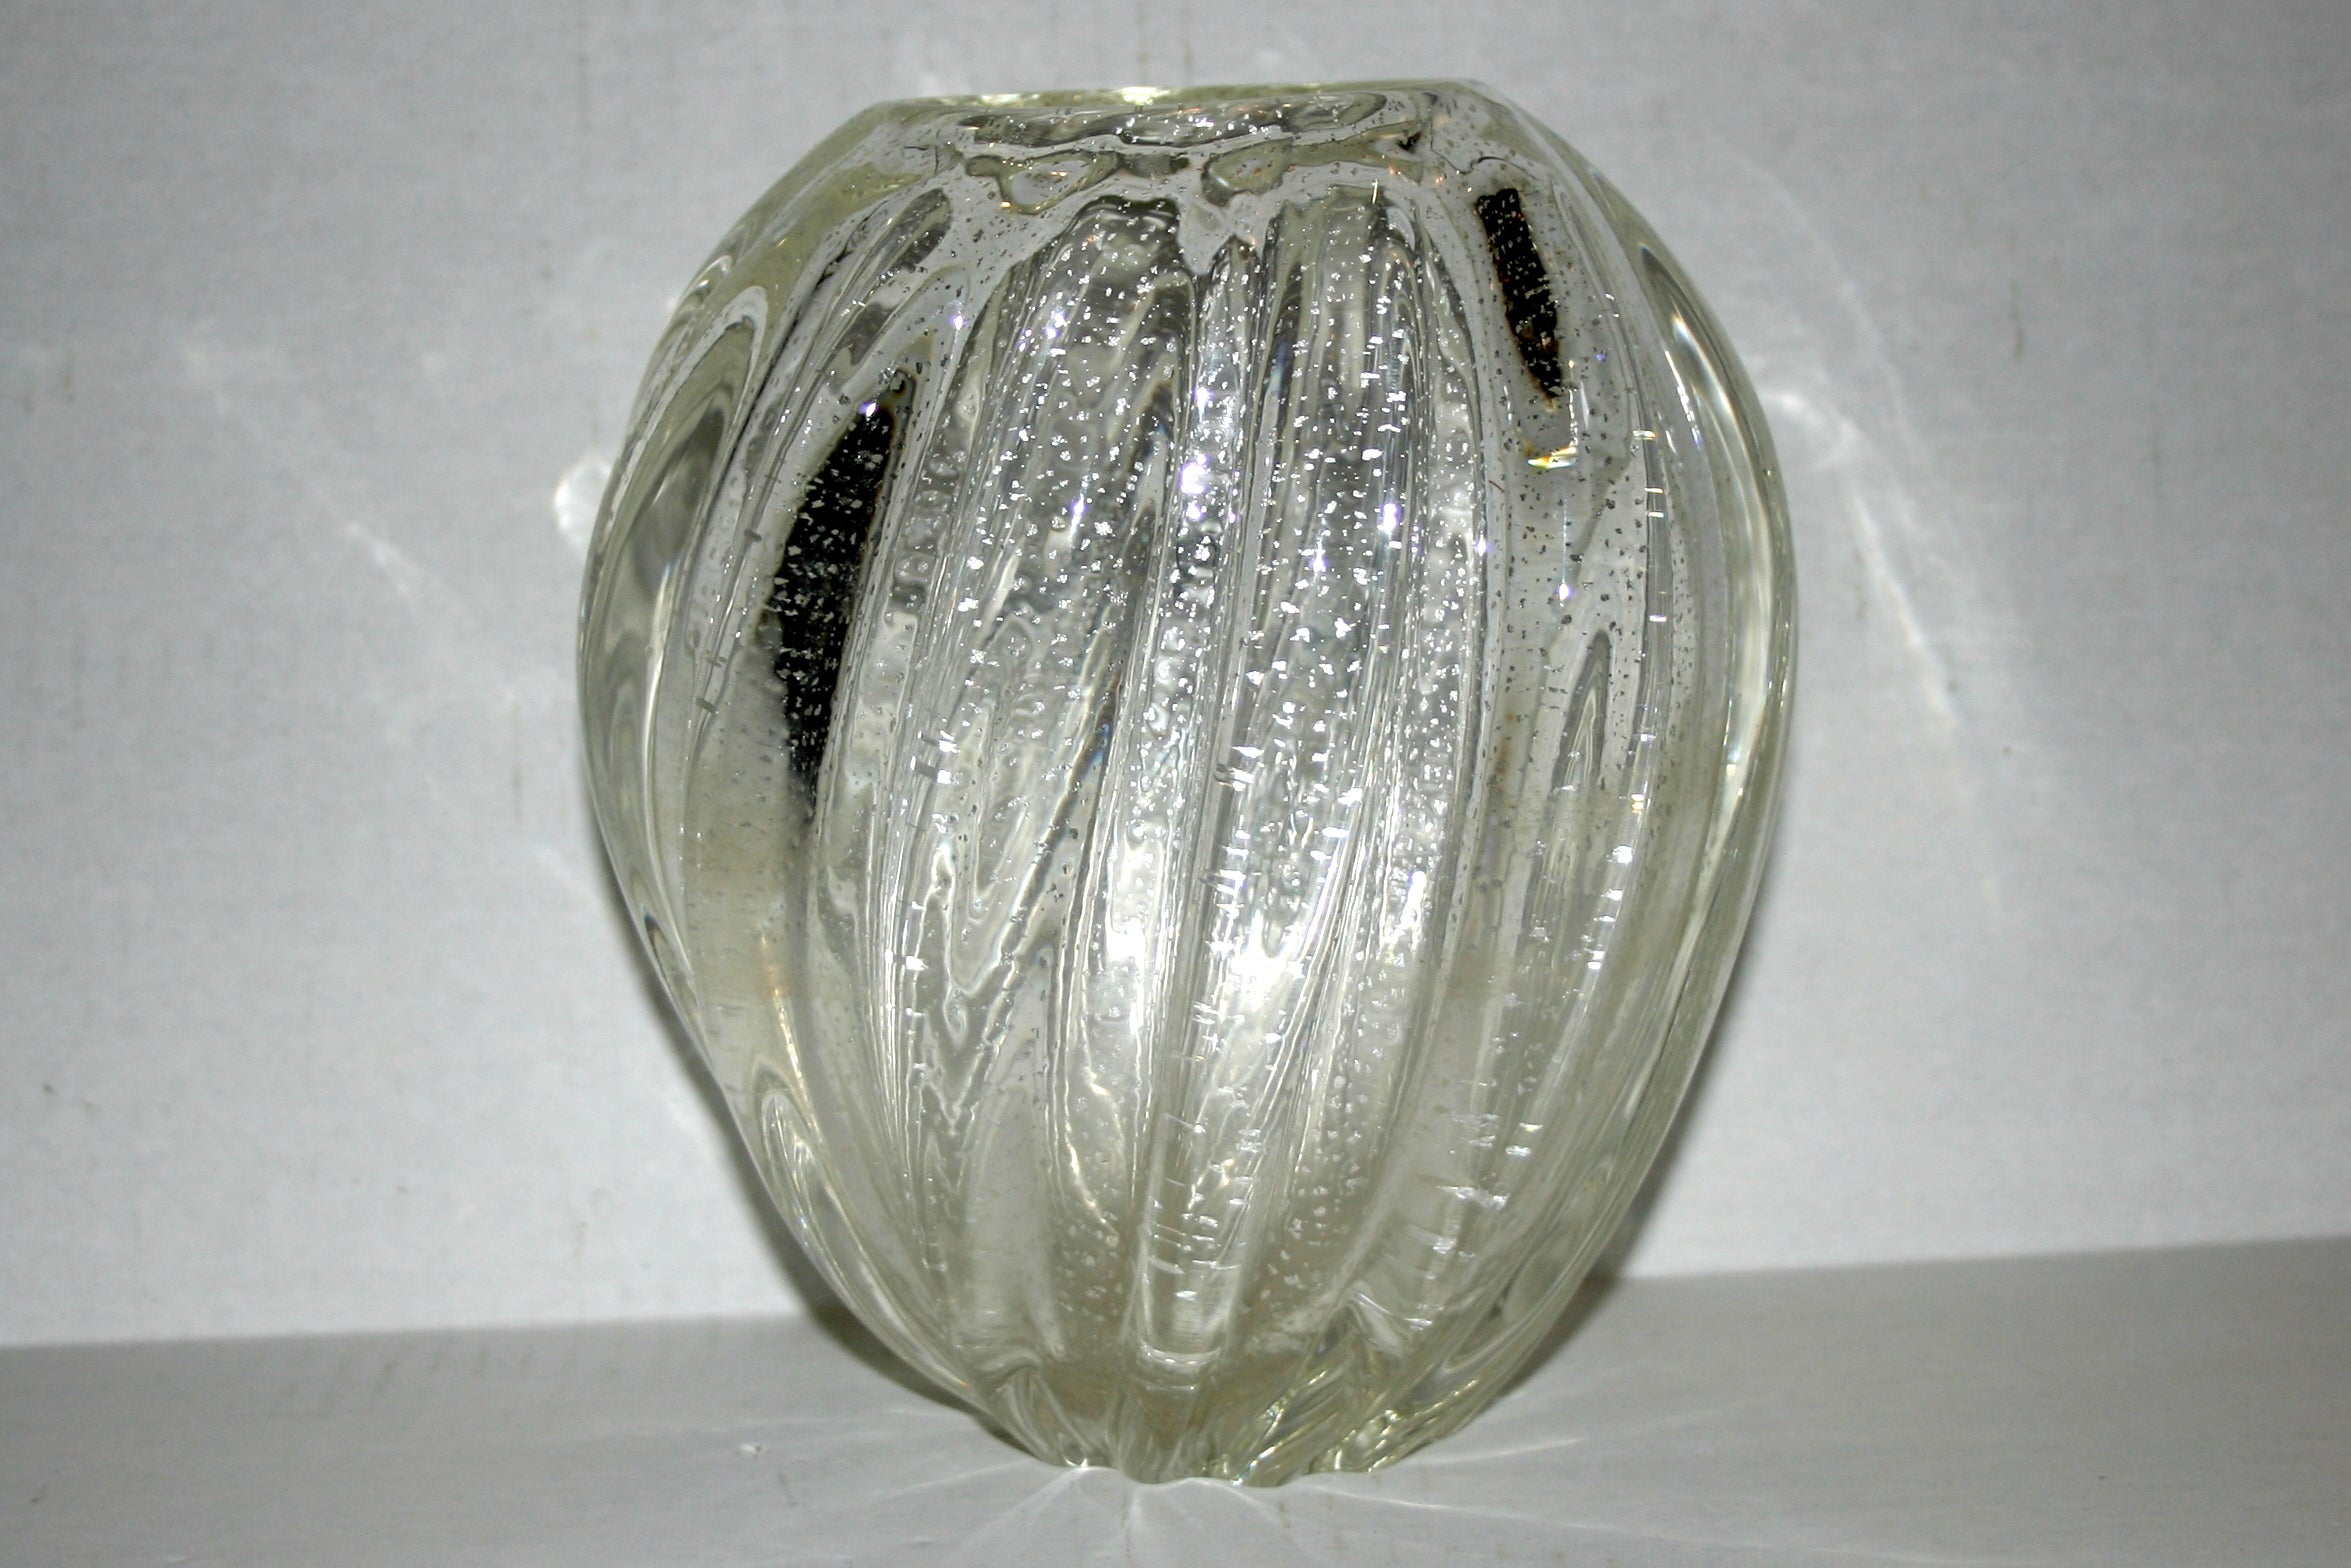 A 1940s Italian Murano glass vase with silver speckles in the glass, twisted tapered body.

Measurements:
Height 7